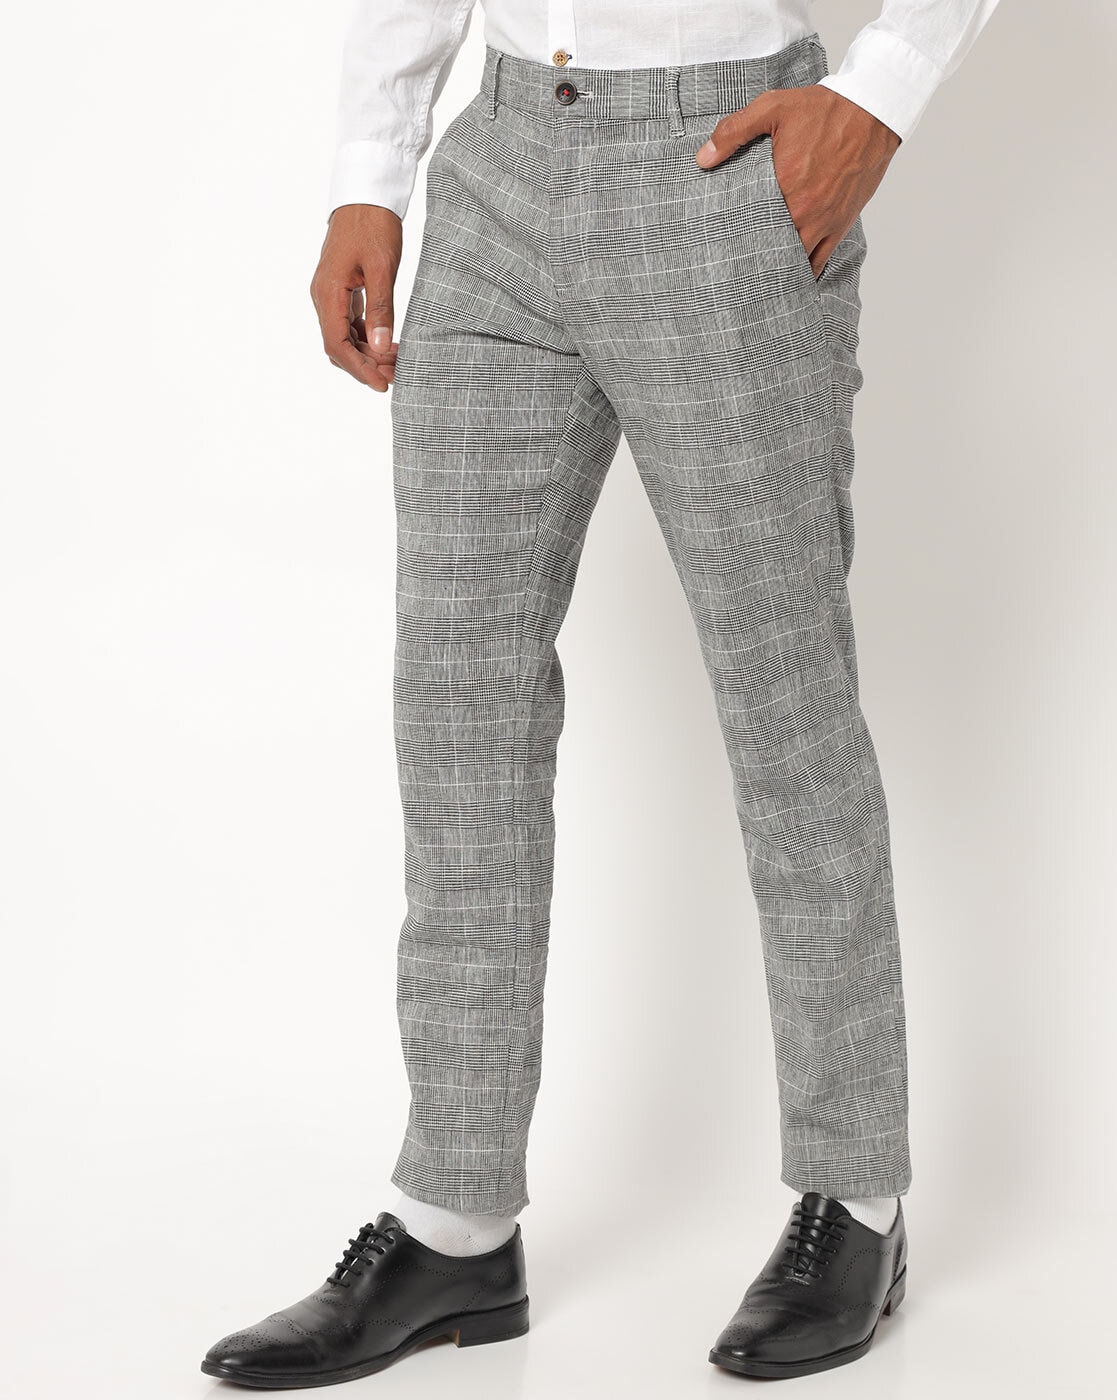 KBFRENDS By Reliance Trends Boys Trousers at Rs125 After Cashback   Paytmmall